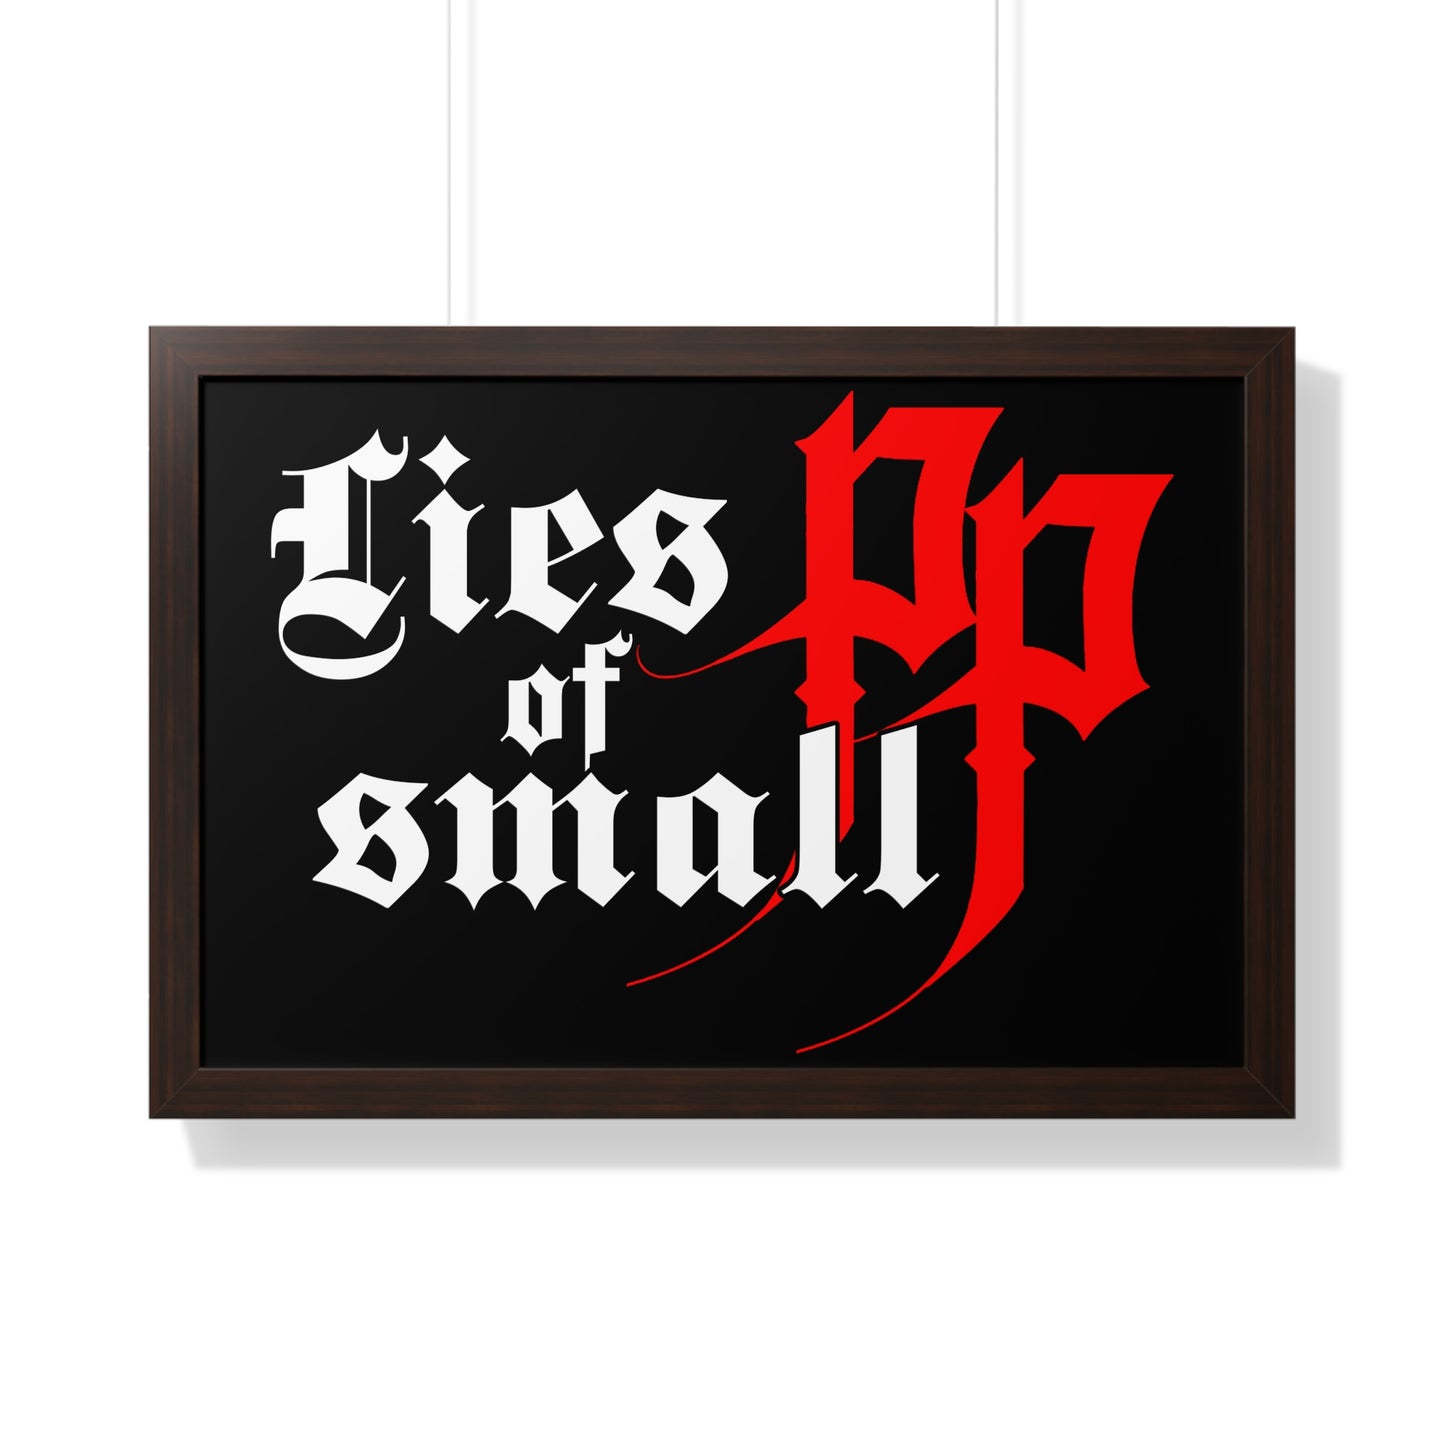 Lies of P Framed Poster - Lies of Small PP